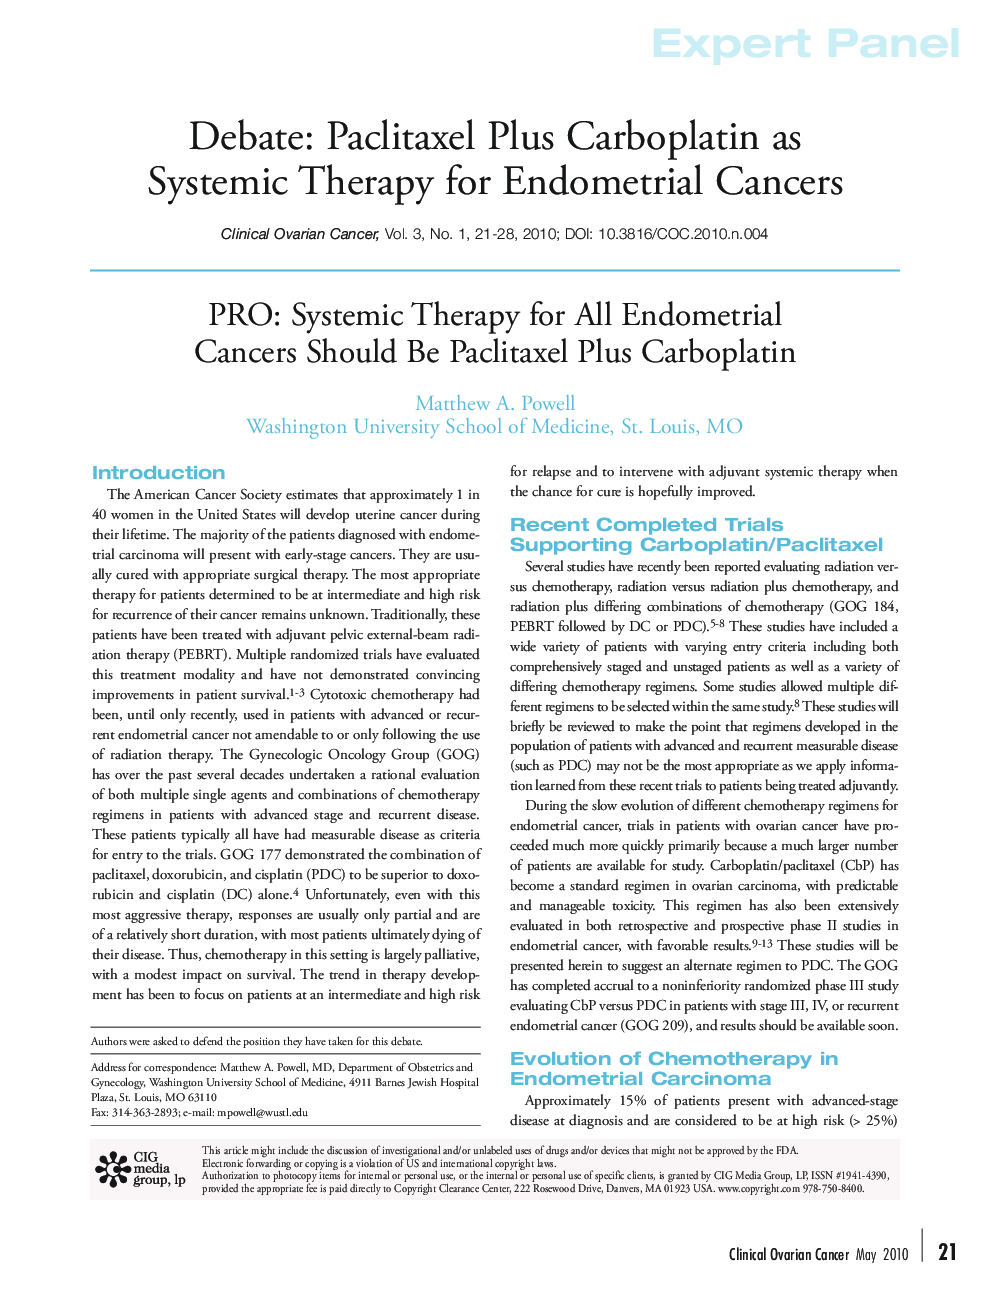 PRO: Systemic Therapy for All Endometrial Cancers Should Be Paclitaxel Plus Carboplatin